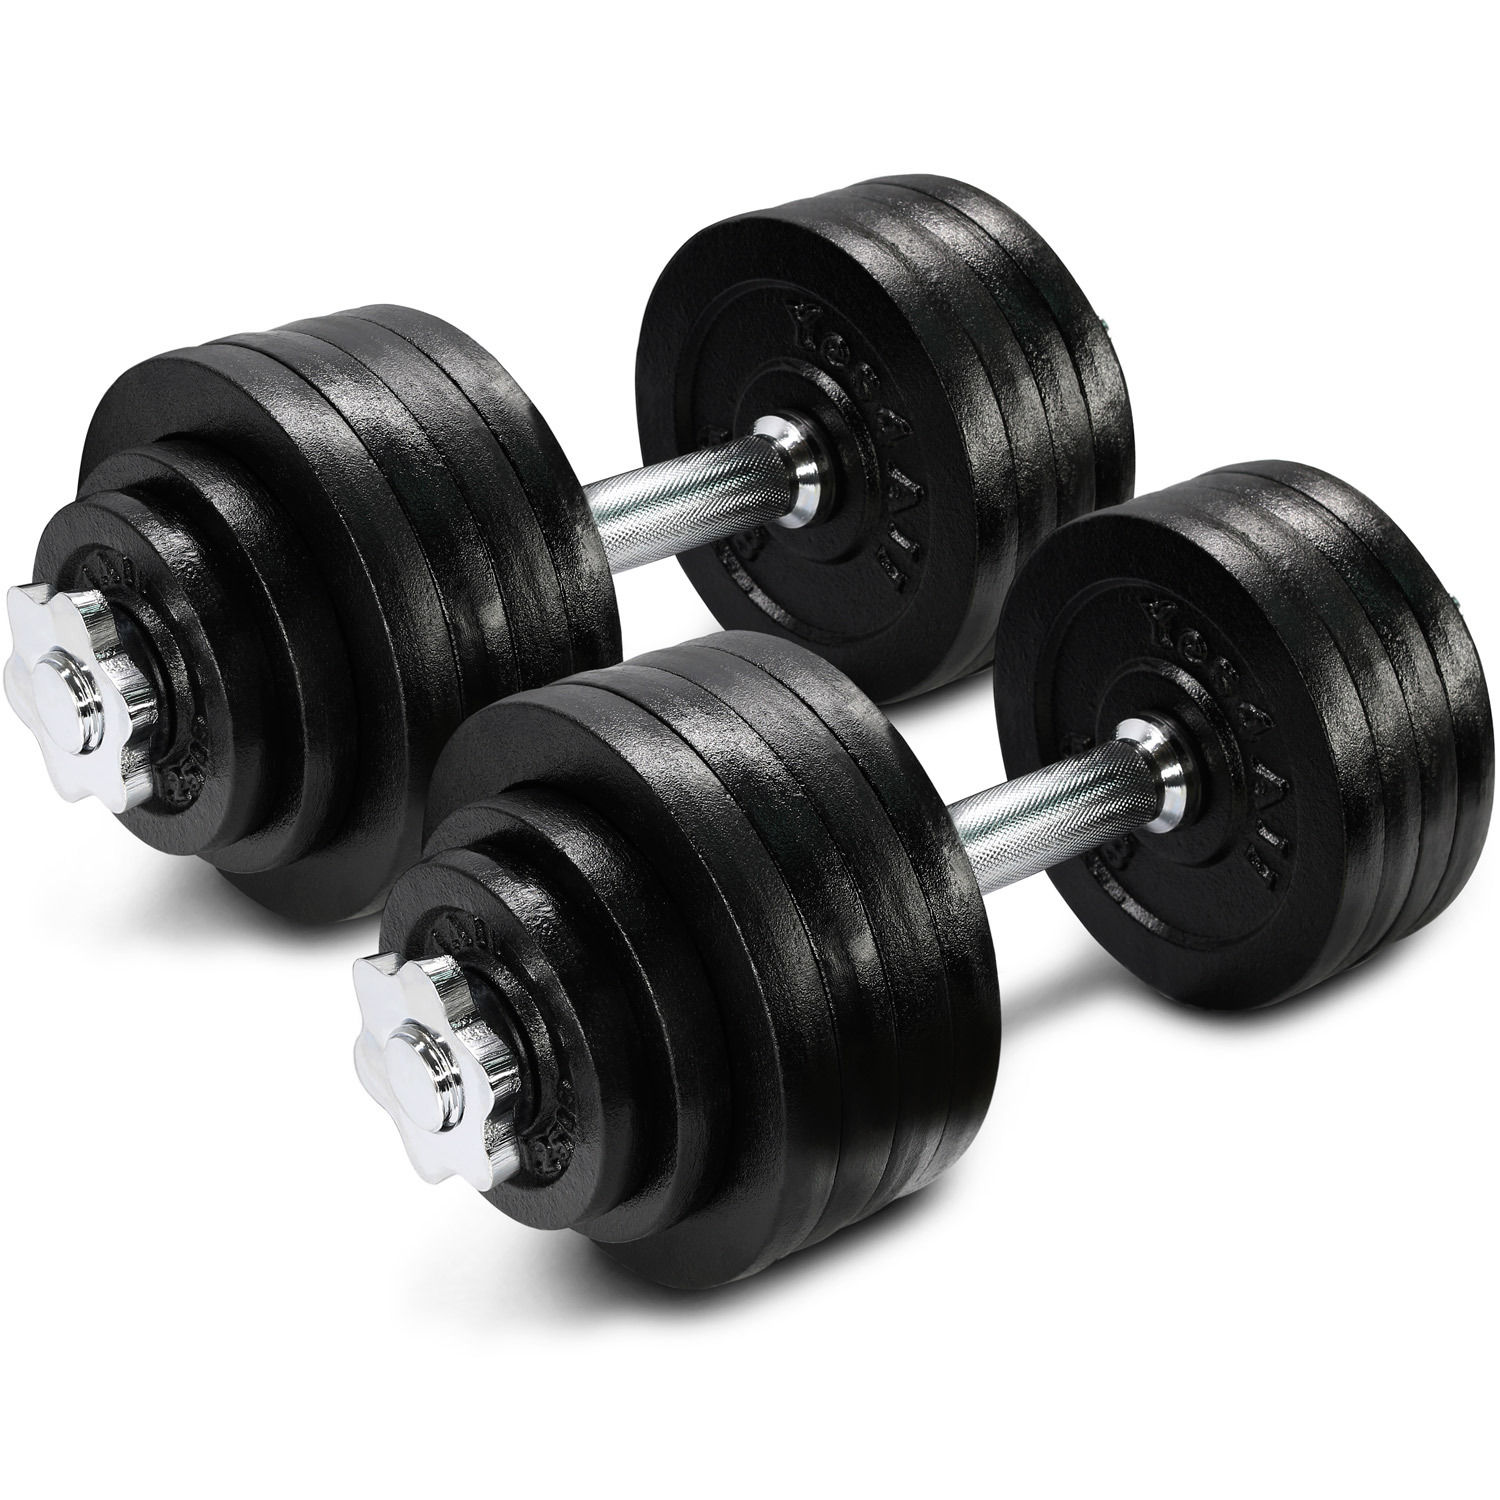 Yes4All 105 lbs Adjustable Dumbbells Set Gym Cap Plate Weight ...